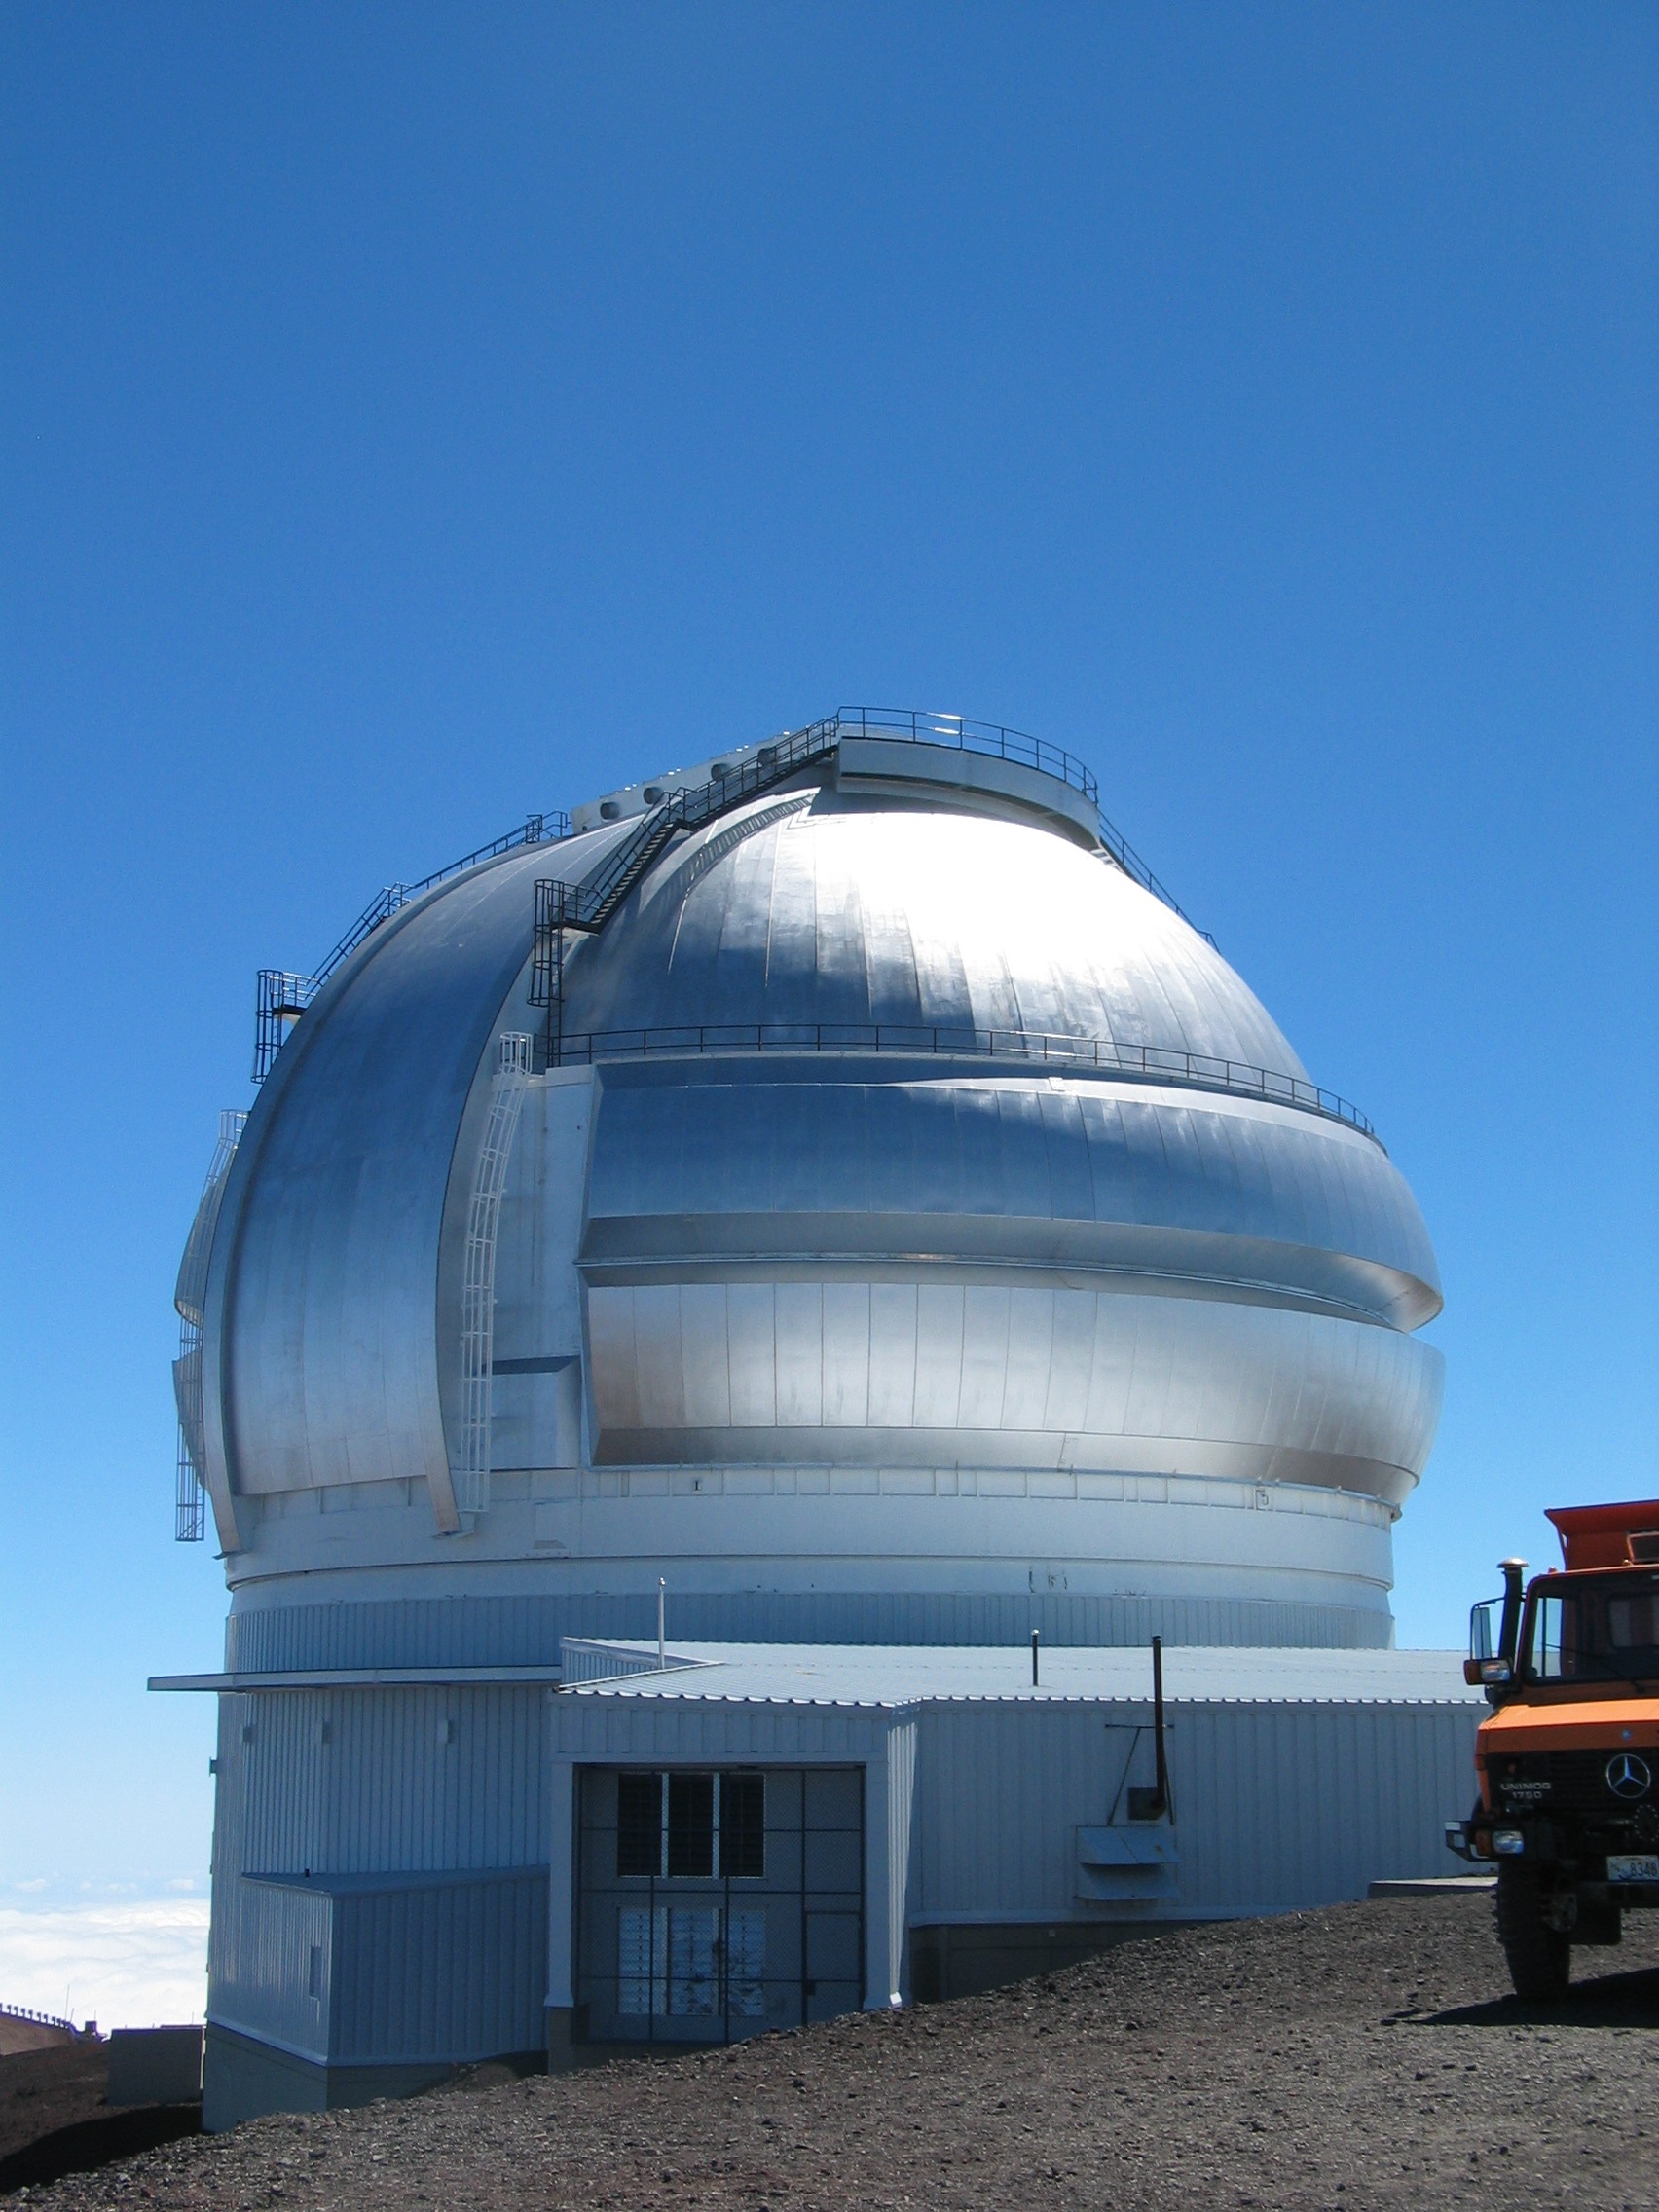 Another observatory